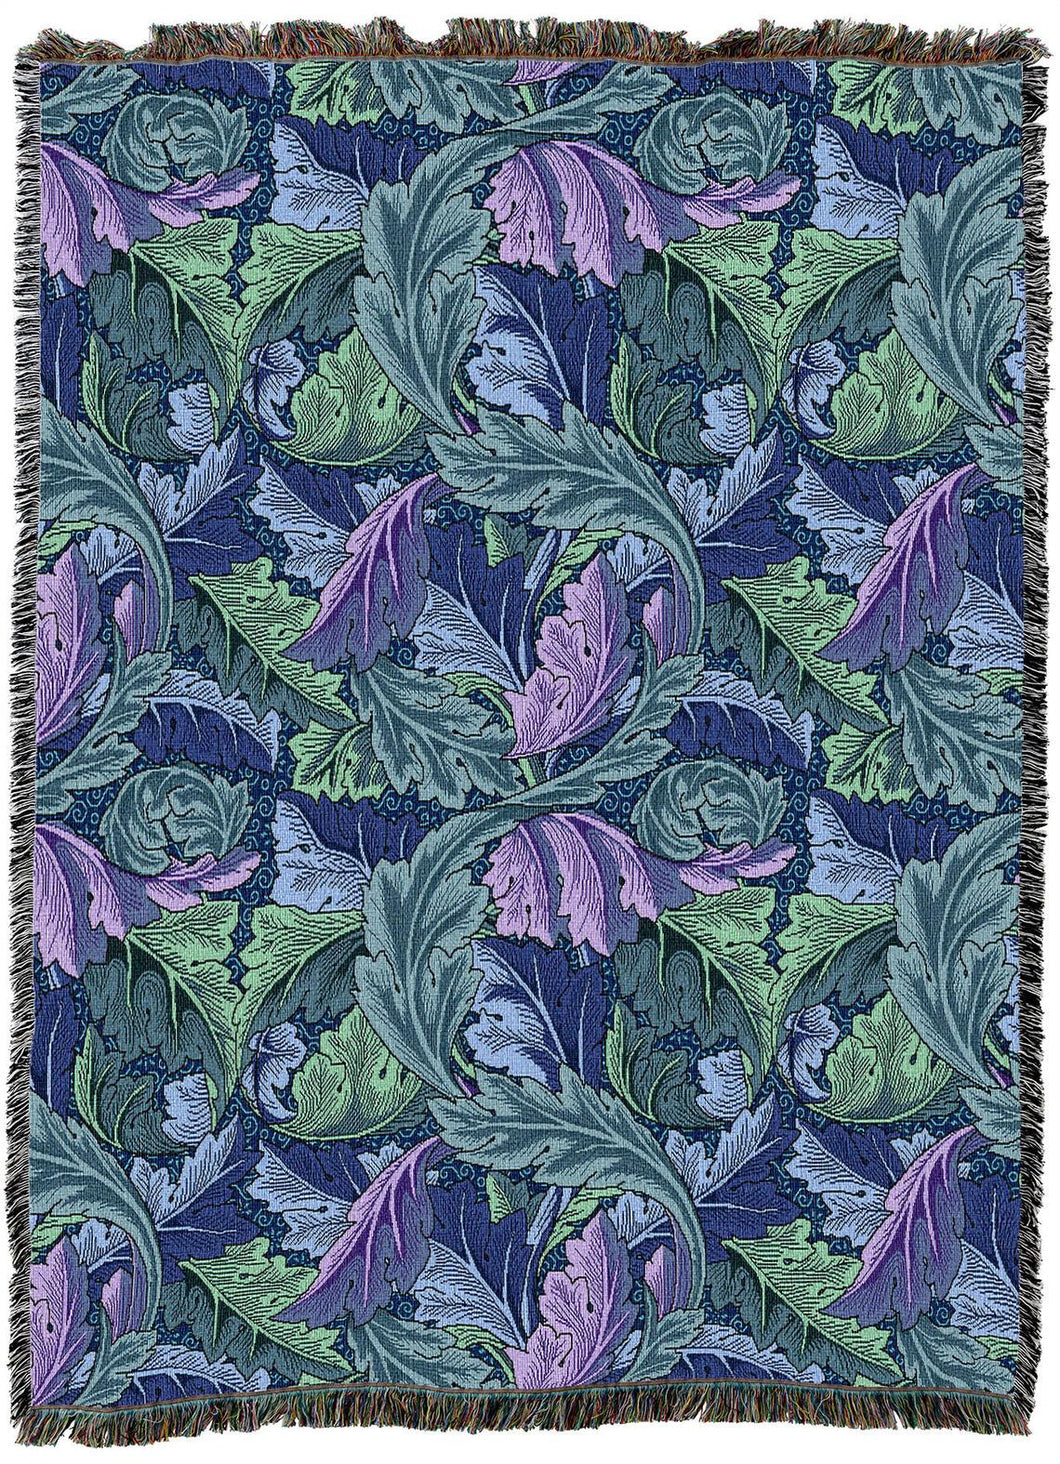 Acanthus Leaves Sea William Morris Arts and Crafts Throw Blanket